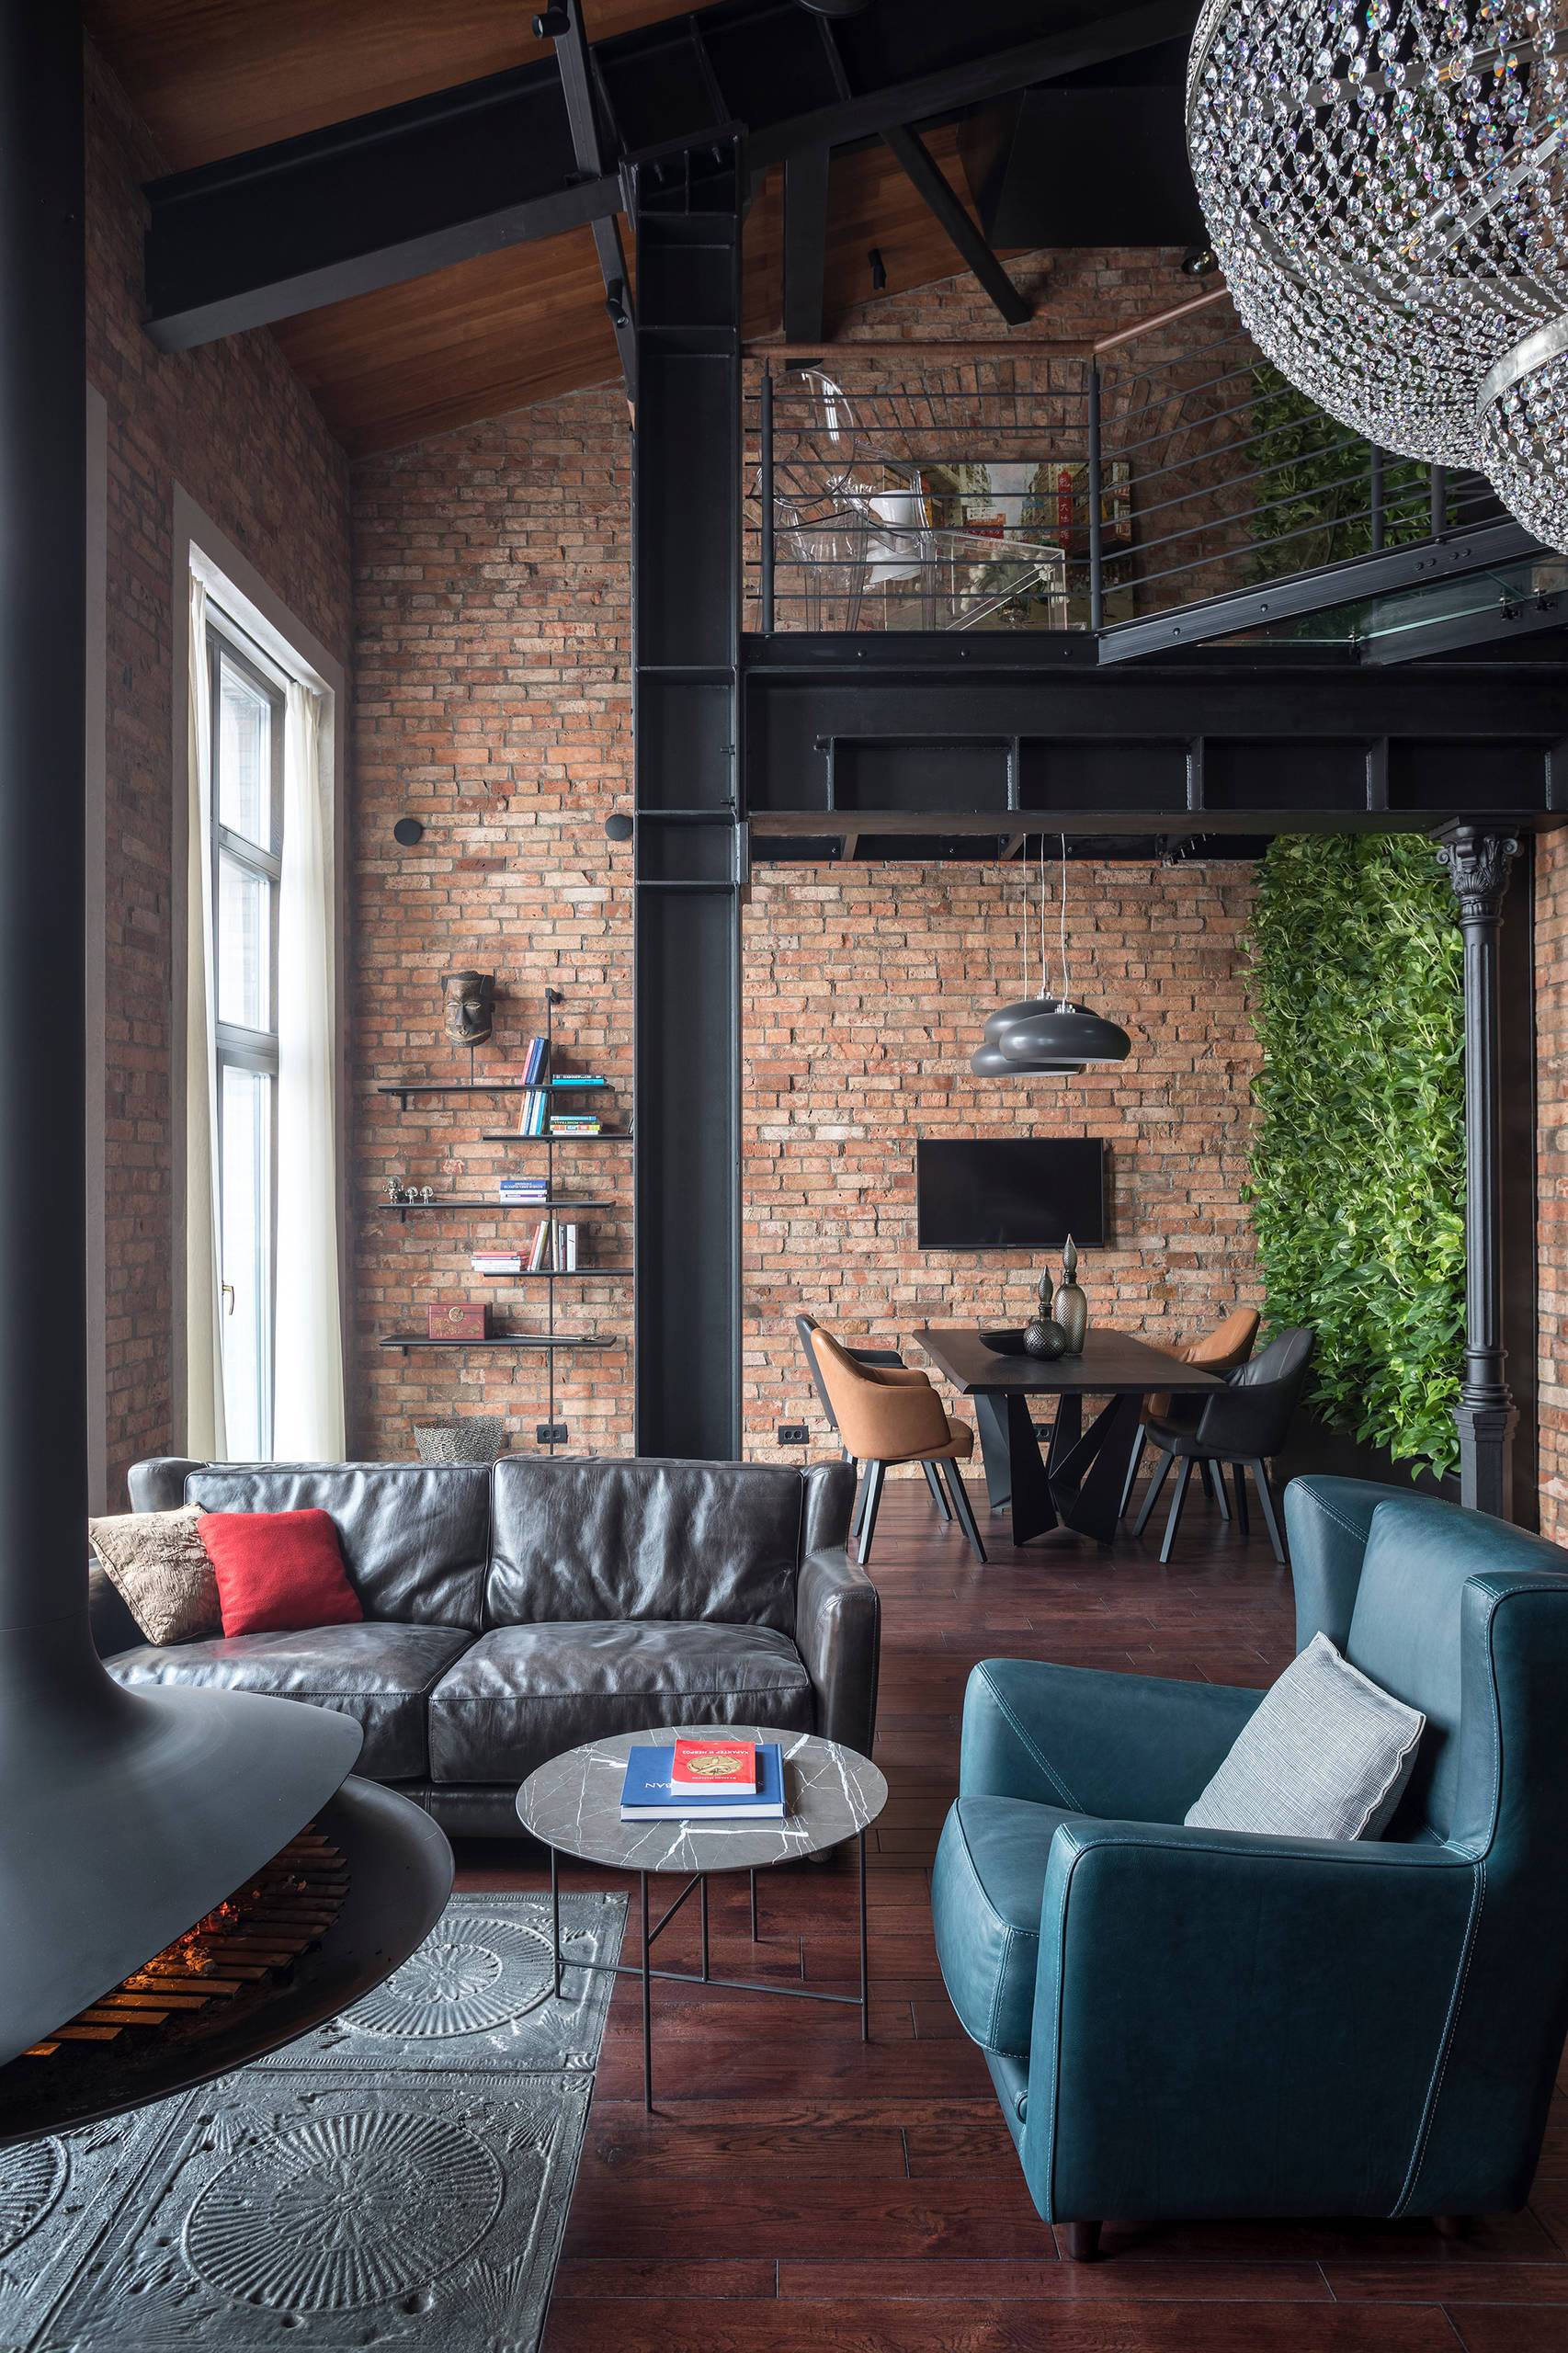 Exposed brick walls (from Houzz)